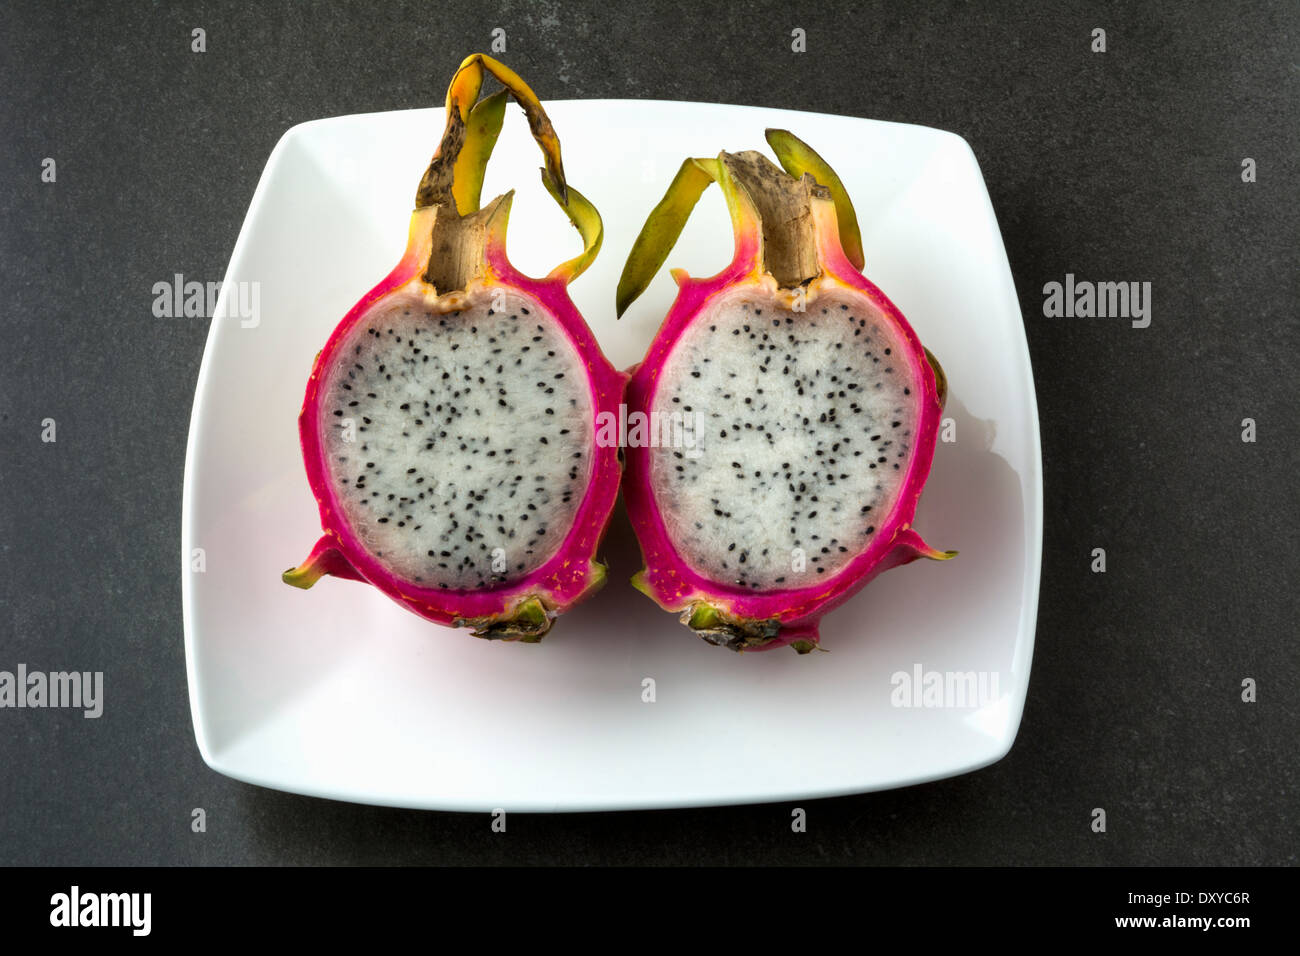 Dragon fruit cut in half on white plate Stock Photo